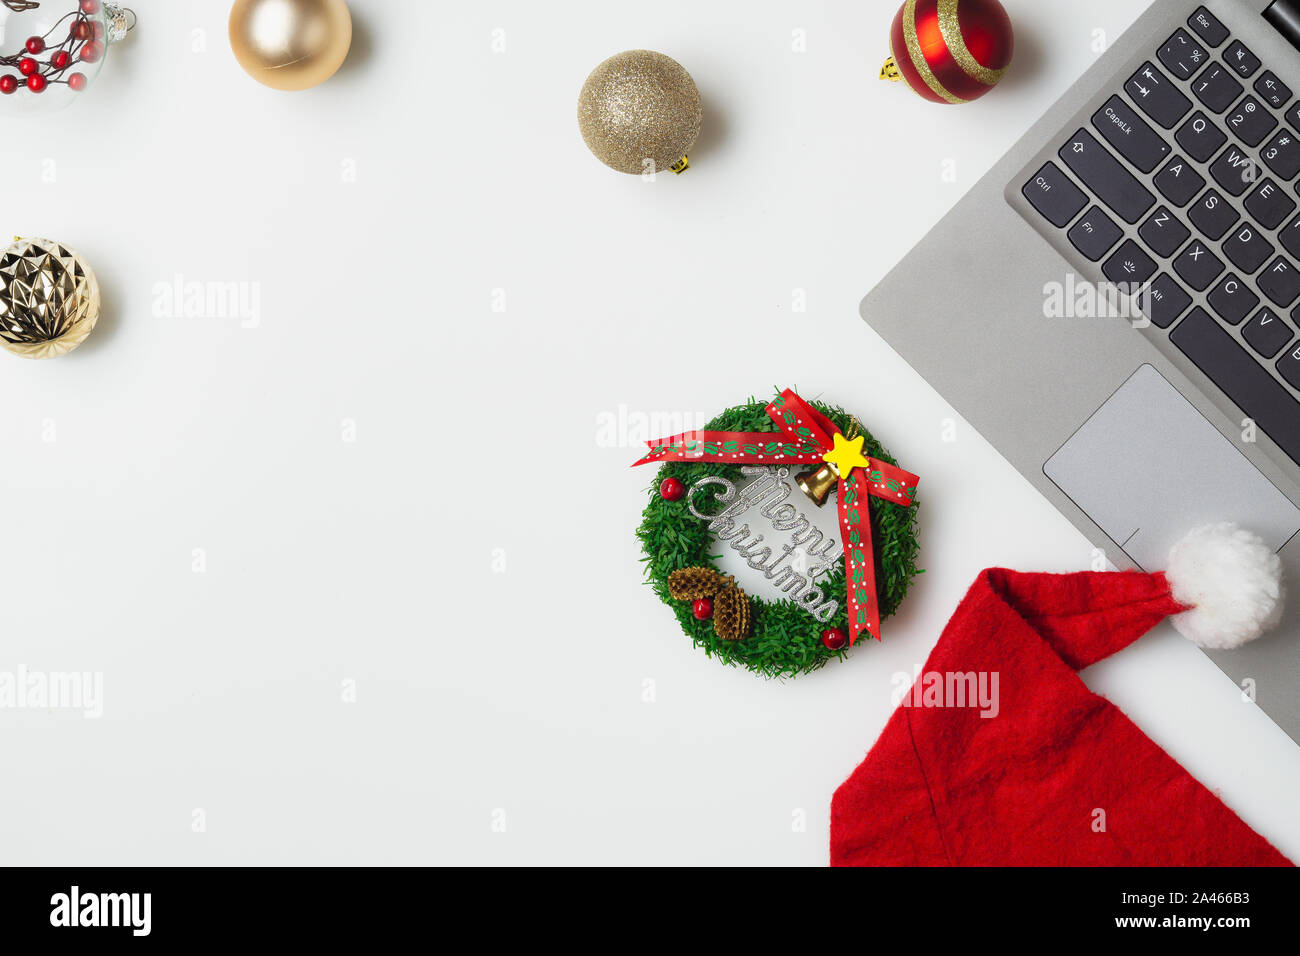 Flat lay top view Christmas office table desk party concept, Christmas workspace with laptop, Santa Claus hat and Christmas decorations on white backg Stock Photo